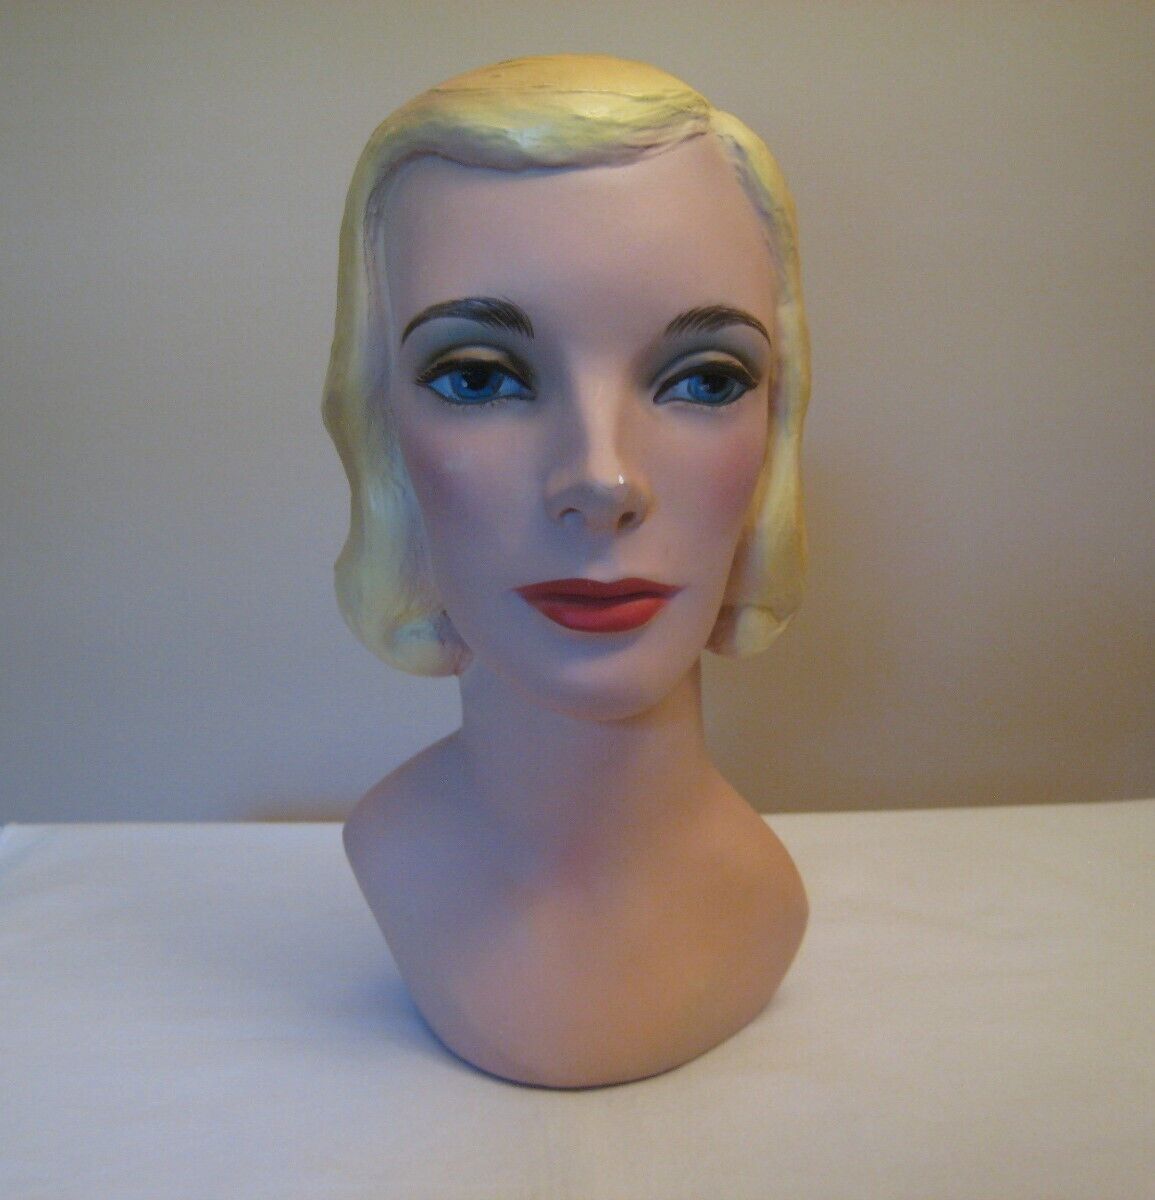 Vintage 1930s-40s Lady Mannequin Head Counter Display